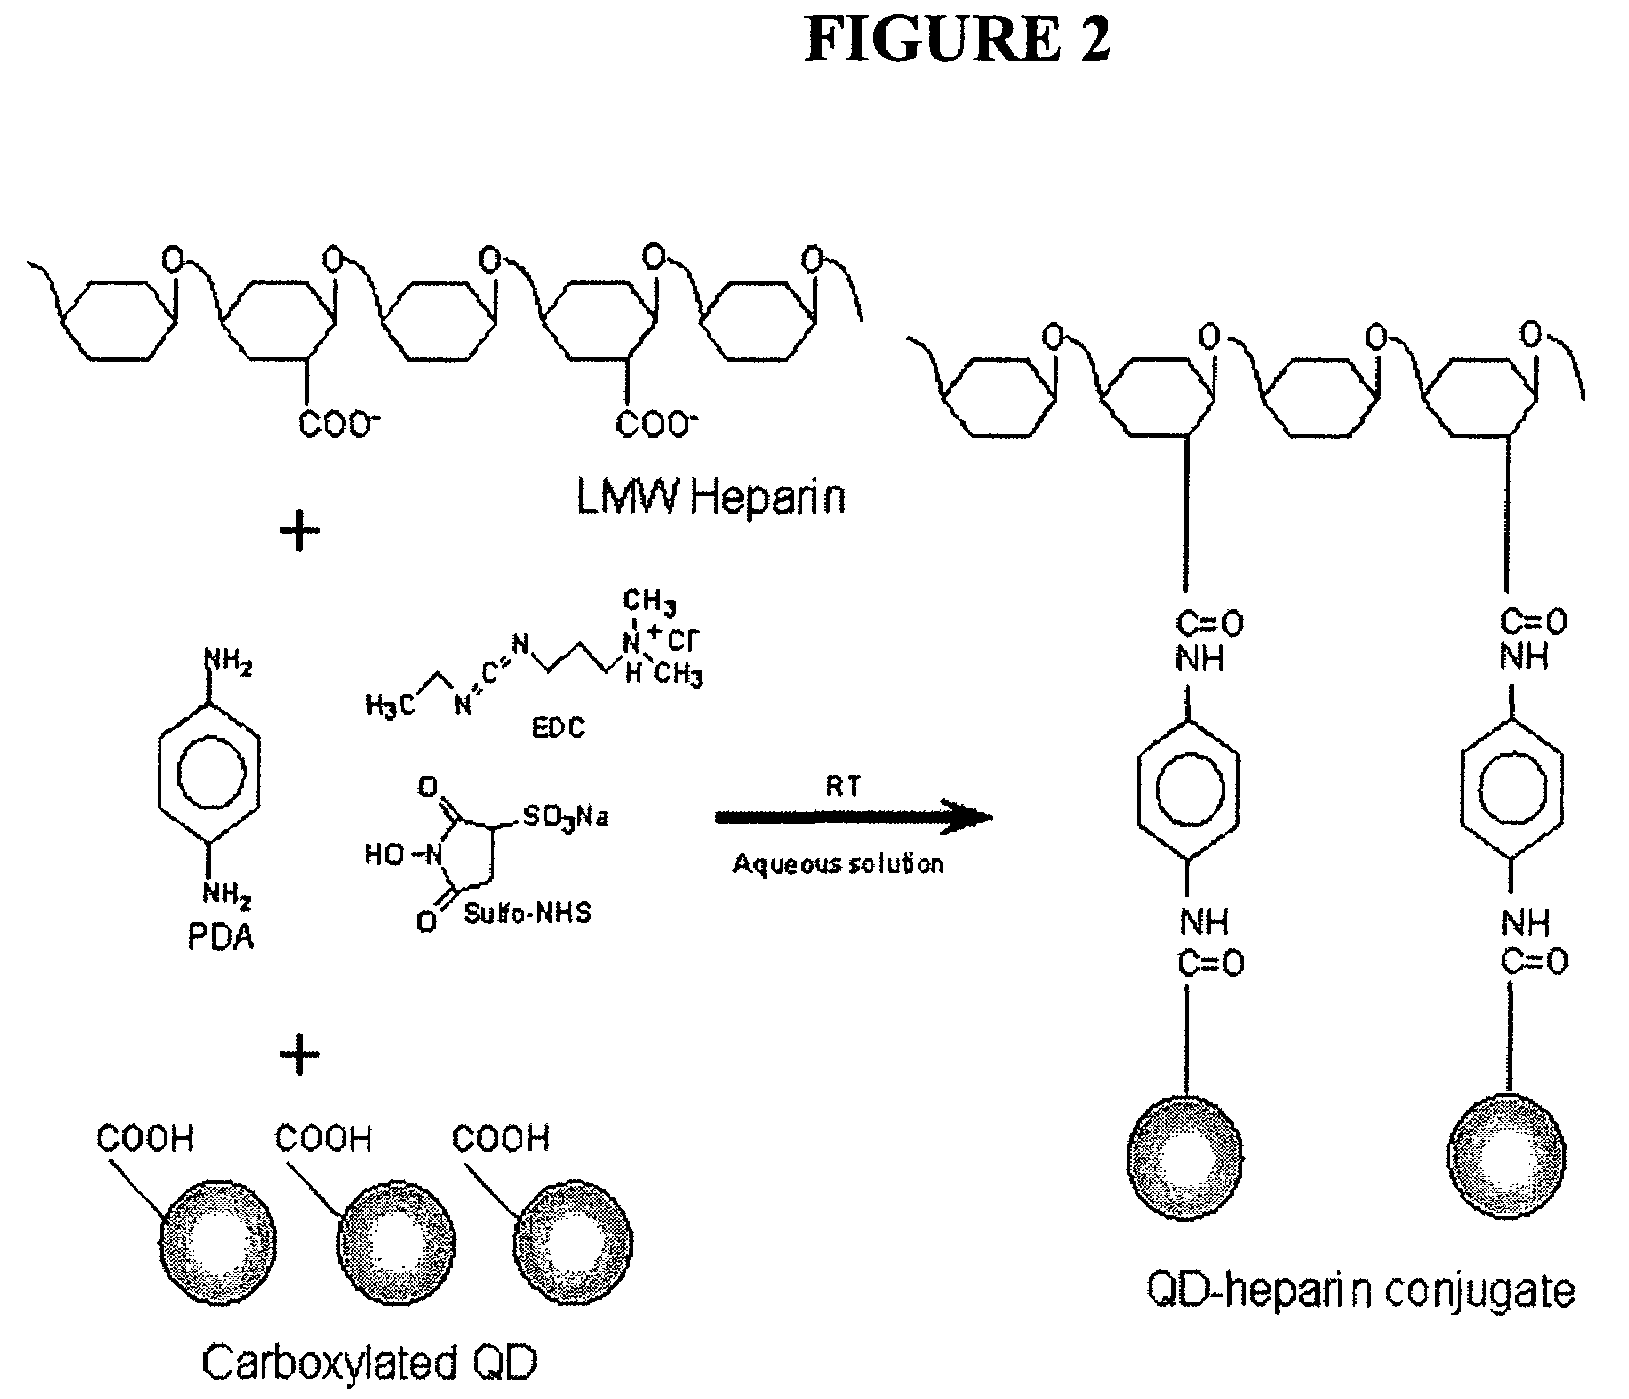 Cell scaffold matrices with incorporated therapeutic agents